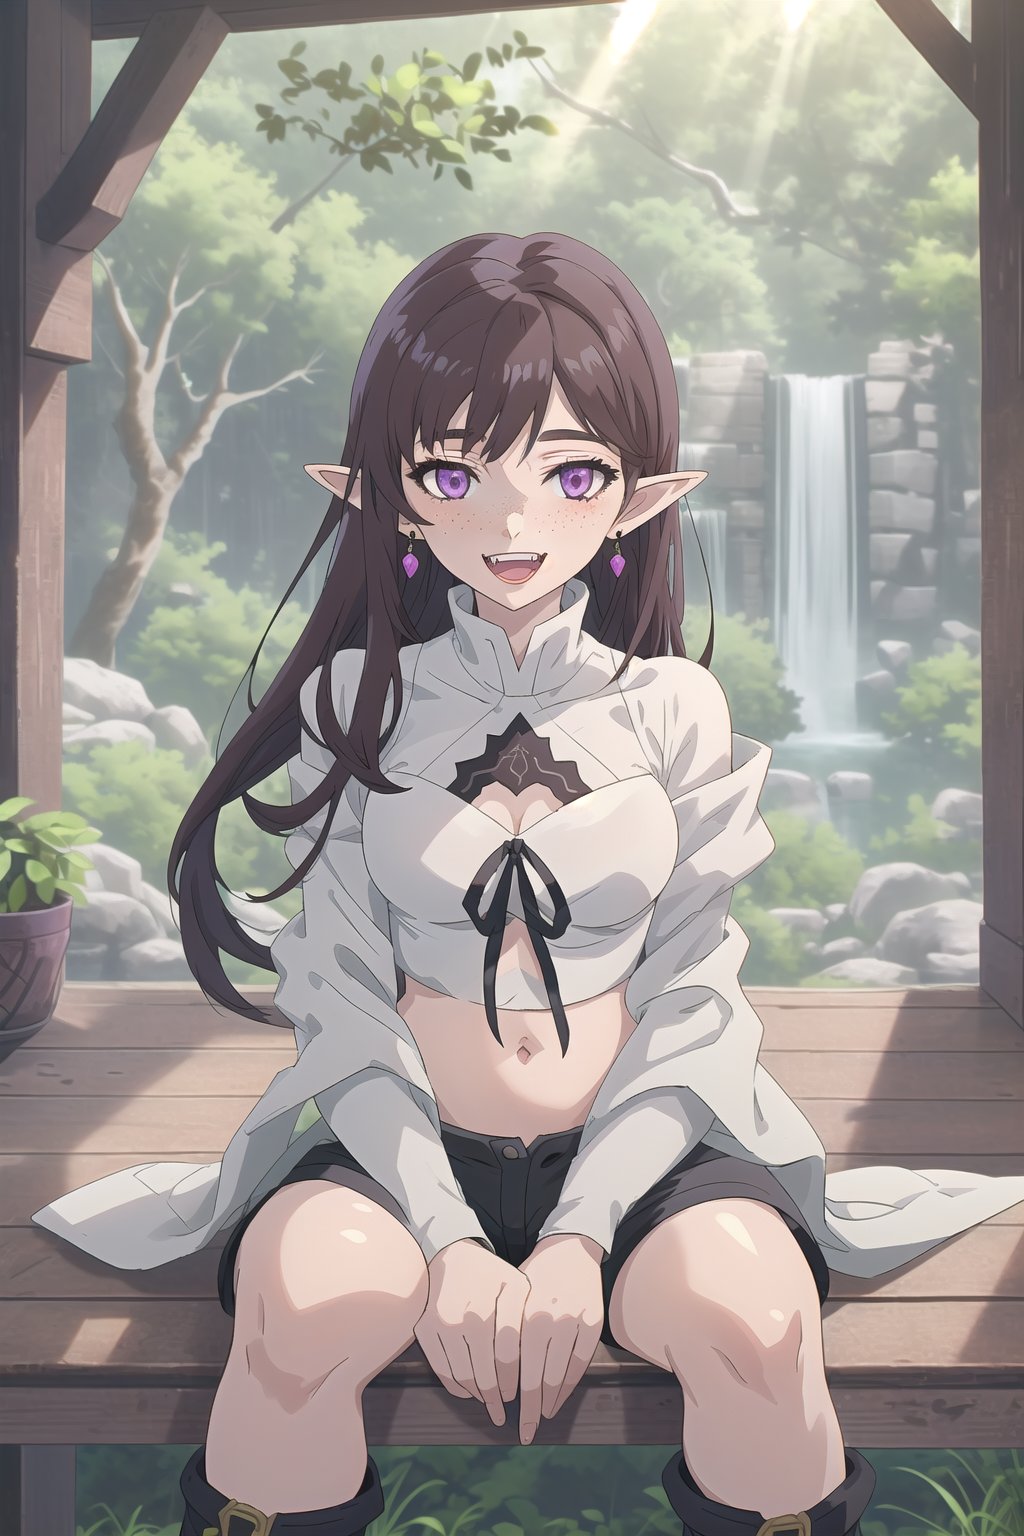 nier anime style illustration, best quality, masterpiece High resolution, good detail, bright colors, HDR, 4K. Dolby vision high. 

Archer elf girl with long straight black hair (hair on shoulders), purple eyes, freckles, blushing, purple earrings

Dark brown medieval fantasy style crop top

Showing navel, exposed navel 

Medieval fantasy dark brown shorts 

Elegant black medieval fantasy style boots 

apple tree forest 

Sunrise 

Intense sun rays between the trees

waterfalls in the distance

Flirty smile (Yandere smile). Happy, excited. Open mouth

Showing fangs, exposed fangs

Selfie,nier anime style

Sitting,nier anime style